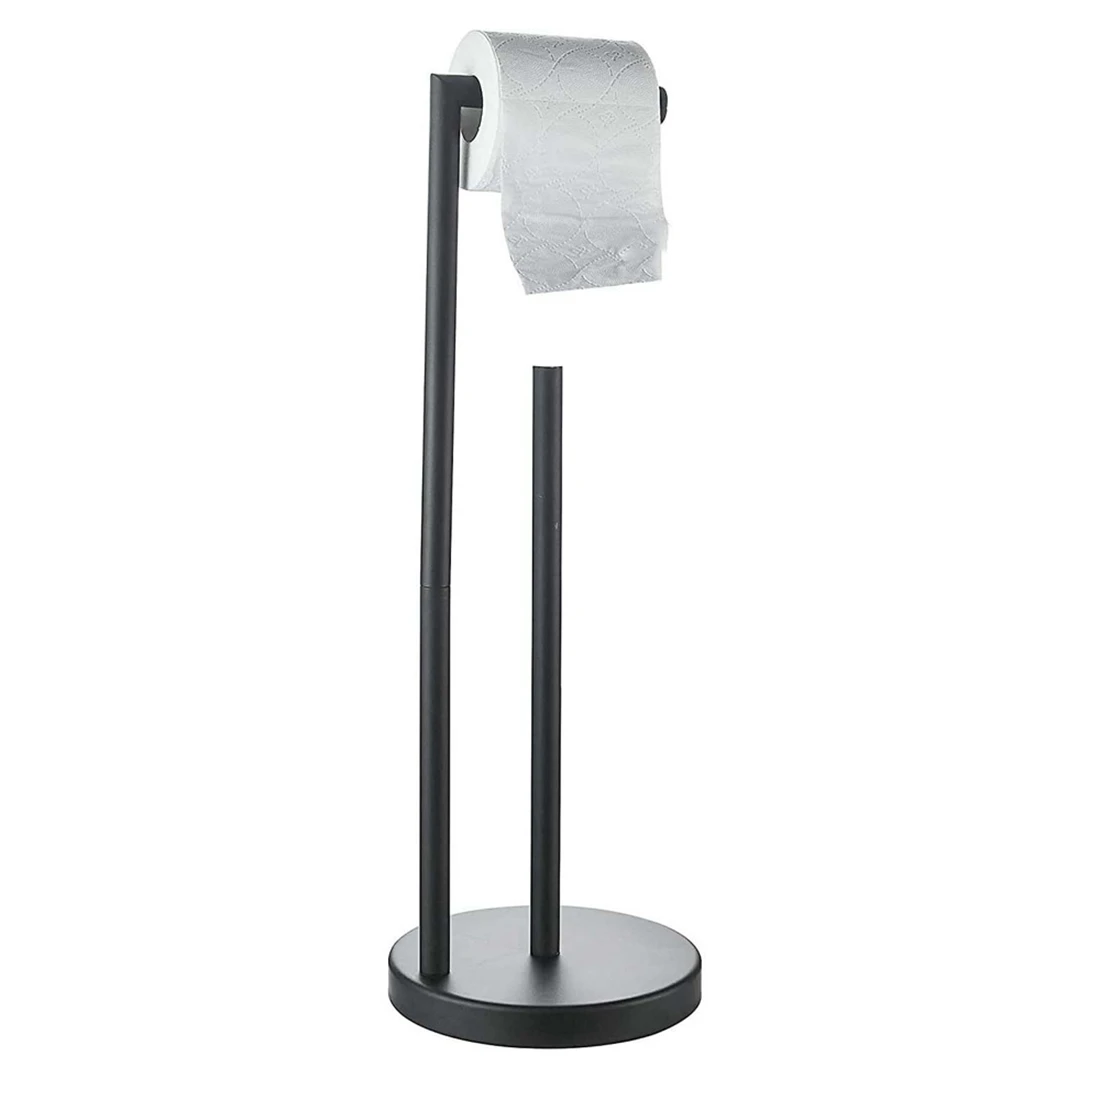 

Toilet Paper Holder Free Standing with Reserve 304 Stainless Steel Rustproof Pedestal Lavatory Tissue Roll Holder Black